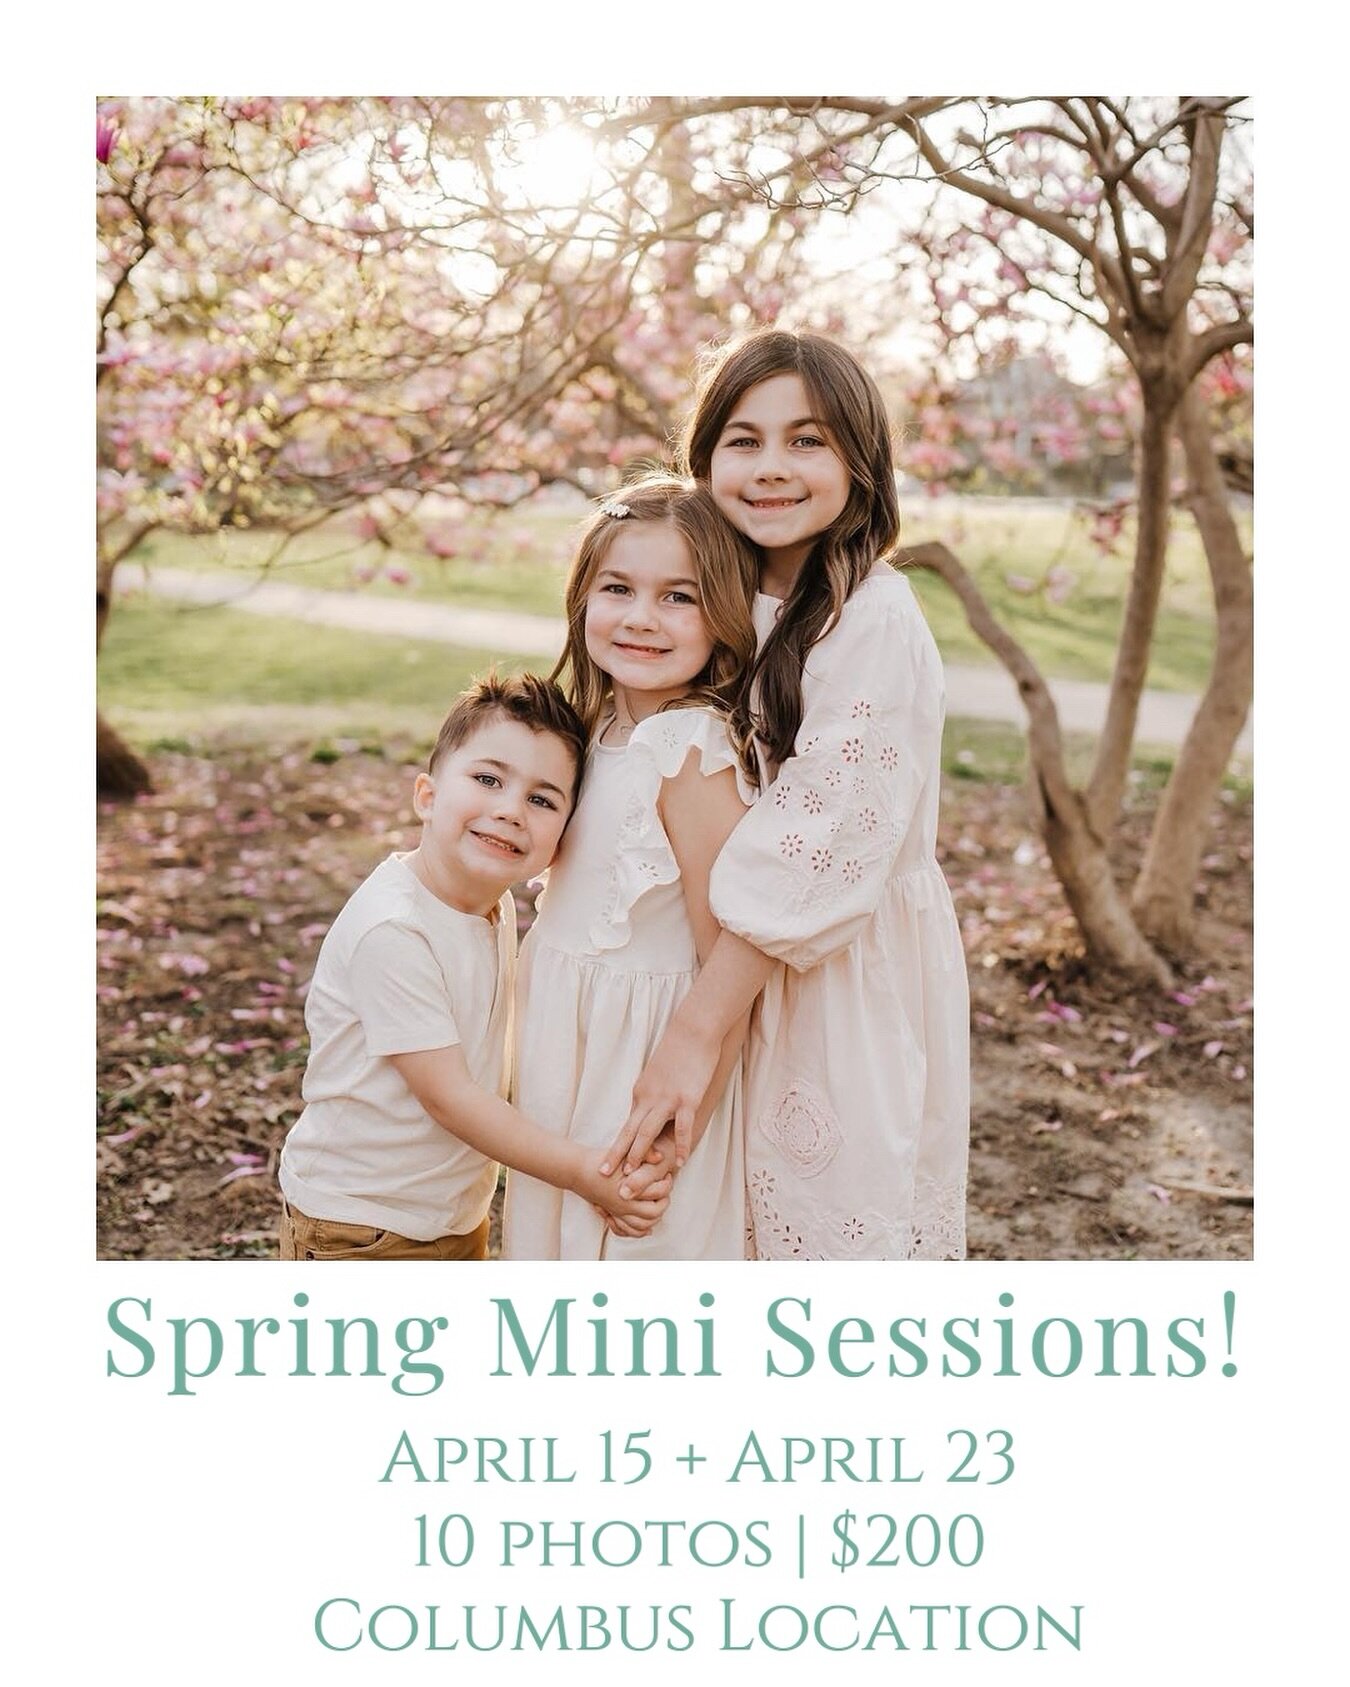 All this warm weather ☀️ is making me so excited for Spring! So it&rsquo;s time to post some spring mini sessions!

Email me to book justinetuhyphoto@gmail.com 🌸 🌹